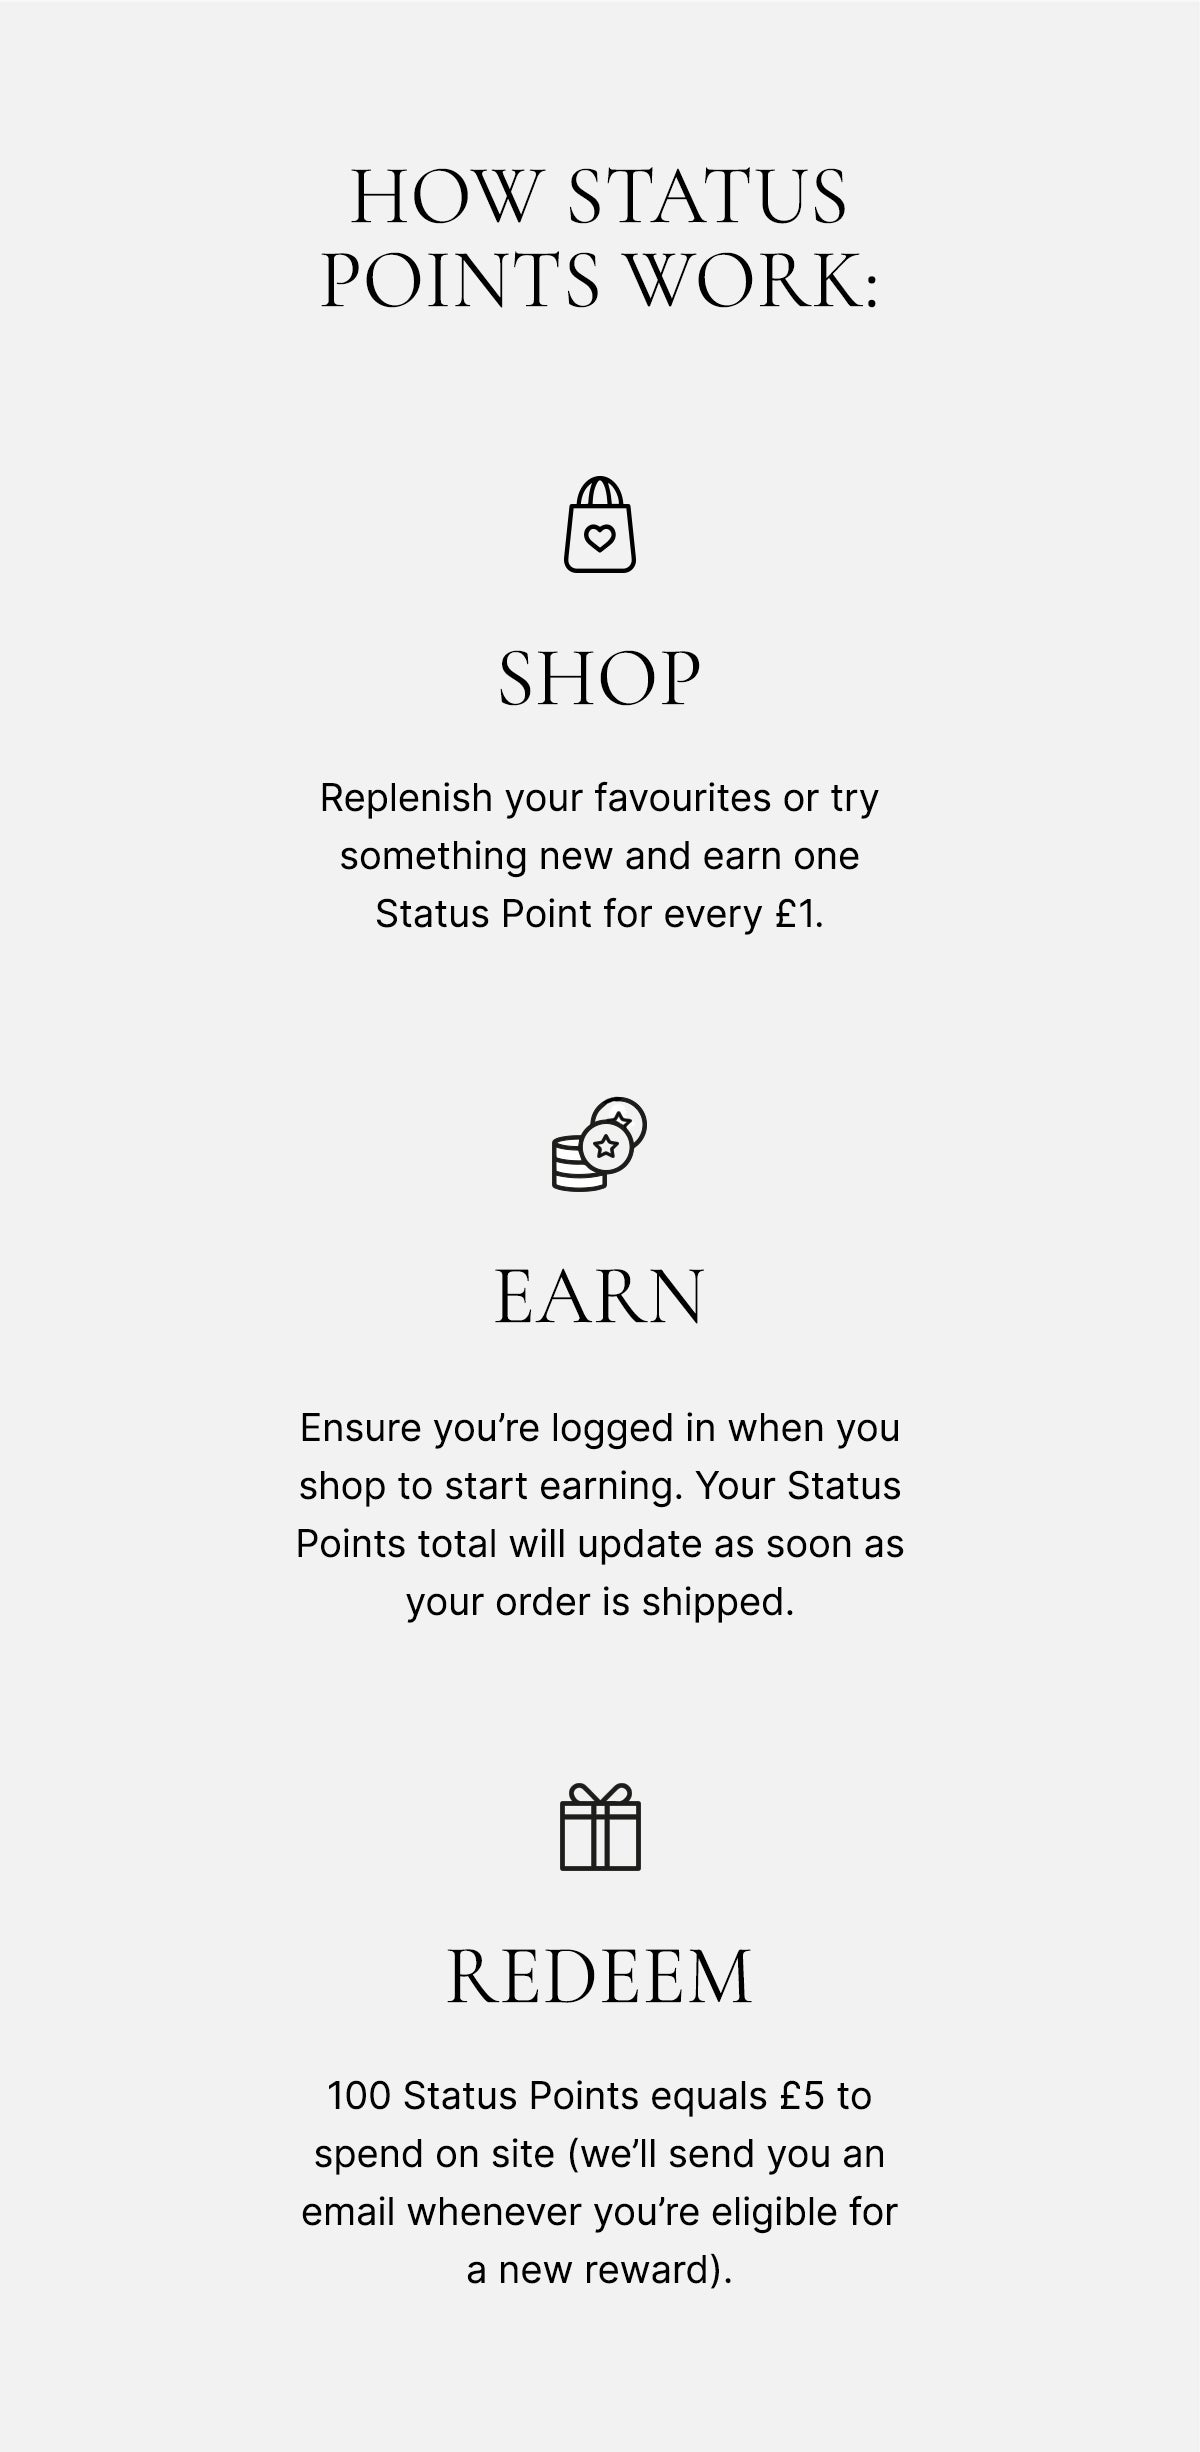 How status points work: SHOP - ensure you're logged in when you shop to start earning. Your Status Points total will update as soon as your order is shipped. EARN - replenish your favourites or try something new and earn one Status Point for every £1*. REWARD - 100 Status Points equals £5 to send on site (we'll send you an email whenever you're eligible for a new reward)